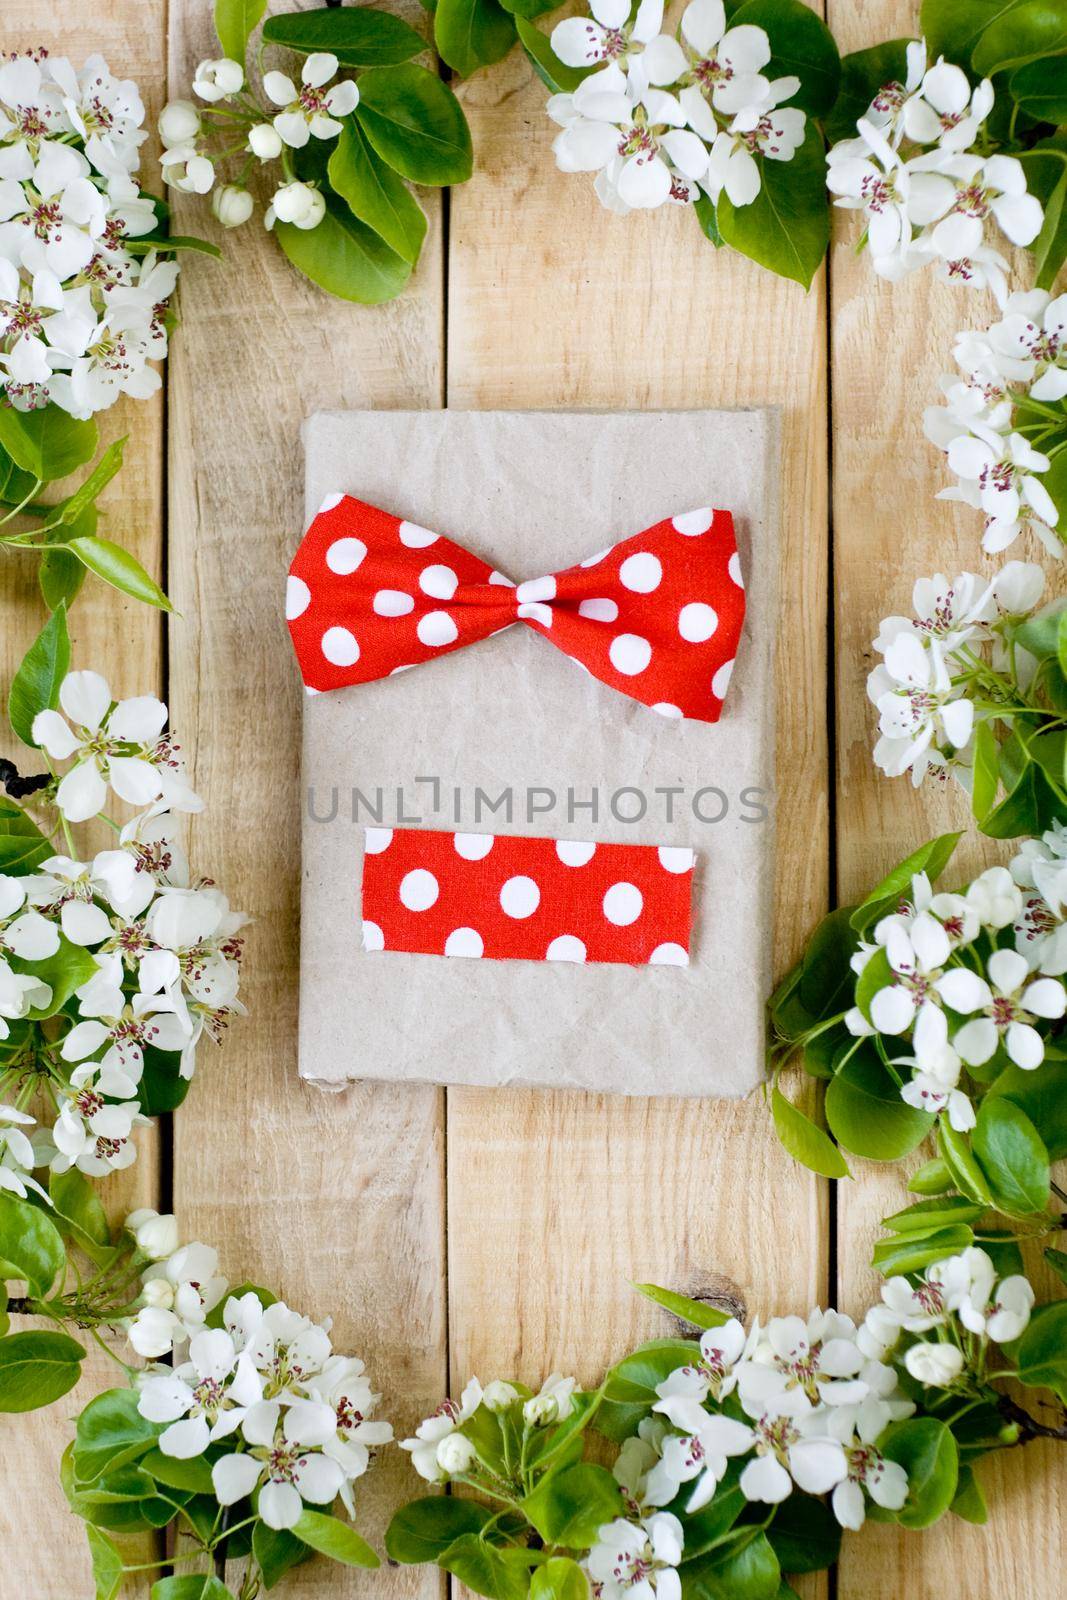 Natural wooden background with white flowers fruit tree. In the middle is a vintage notebook with bow tie by Myrka